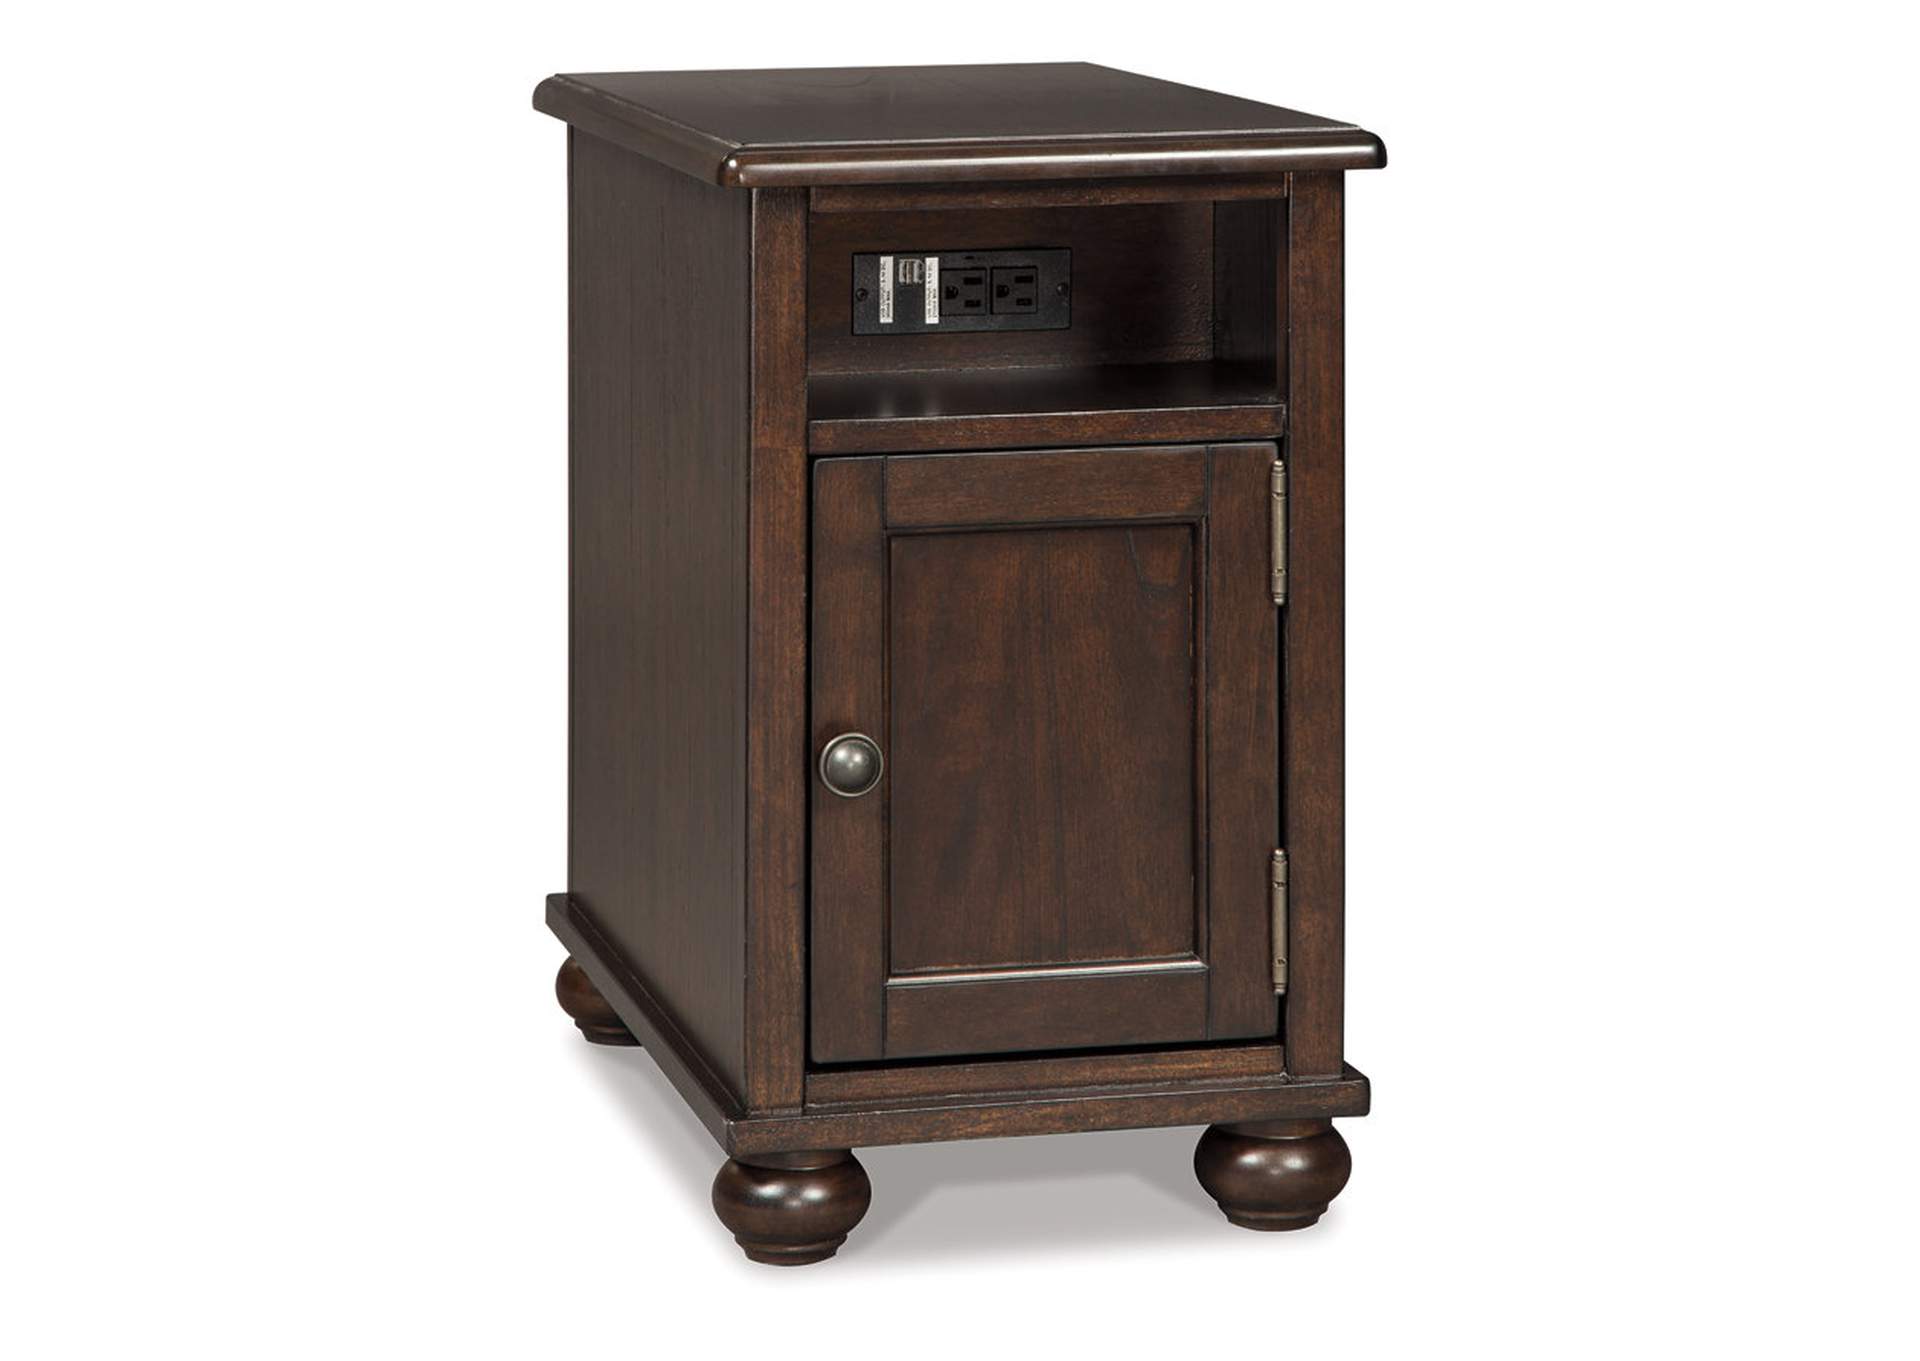 Barilanni Chairside End Table with USB Ports & Outlets,Signature Design By Ashley